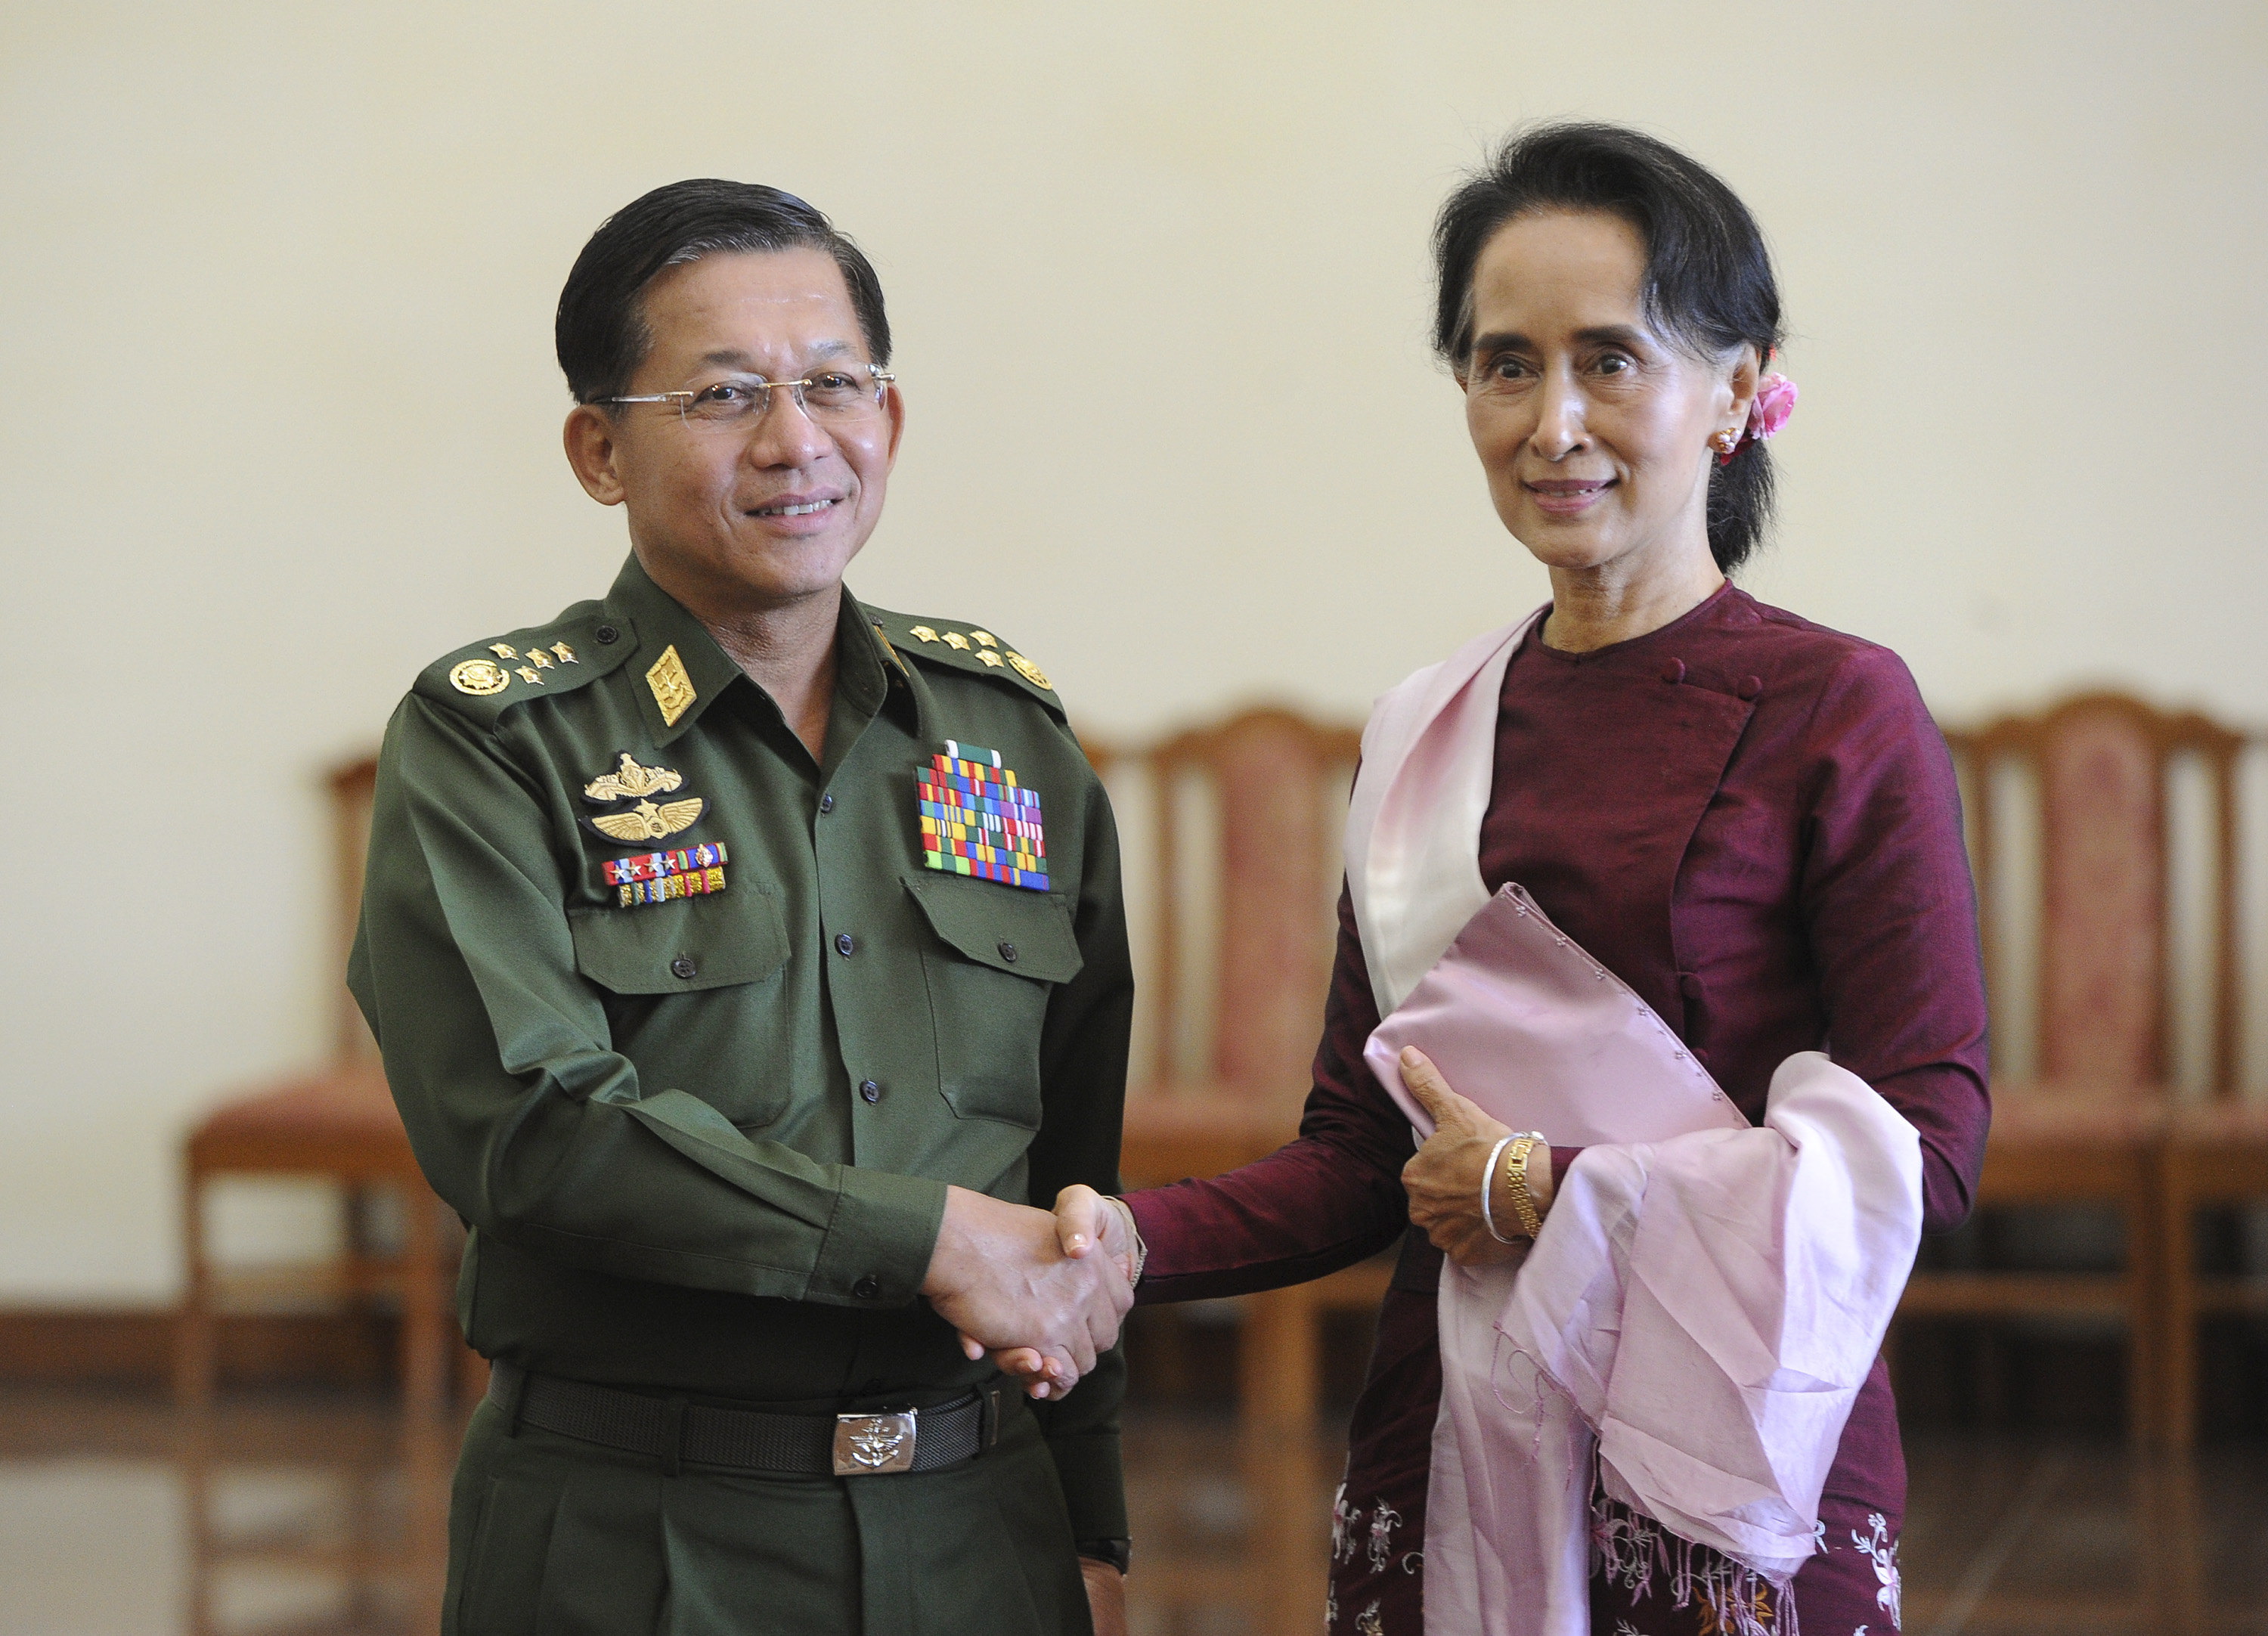 Myanmar's Commander-in-Chief Min Aung Hlaing and National League for Democracy (NLD) party leader Aung San Suu Kyi shake hands after their meeting in Naypyitaw